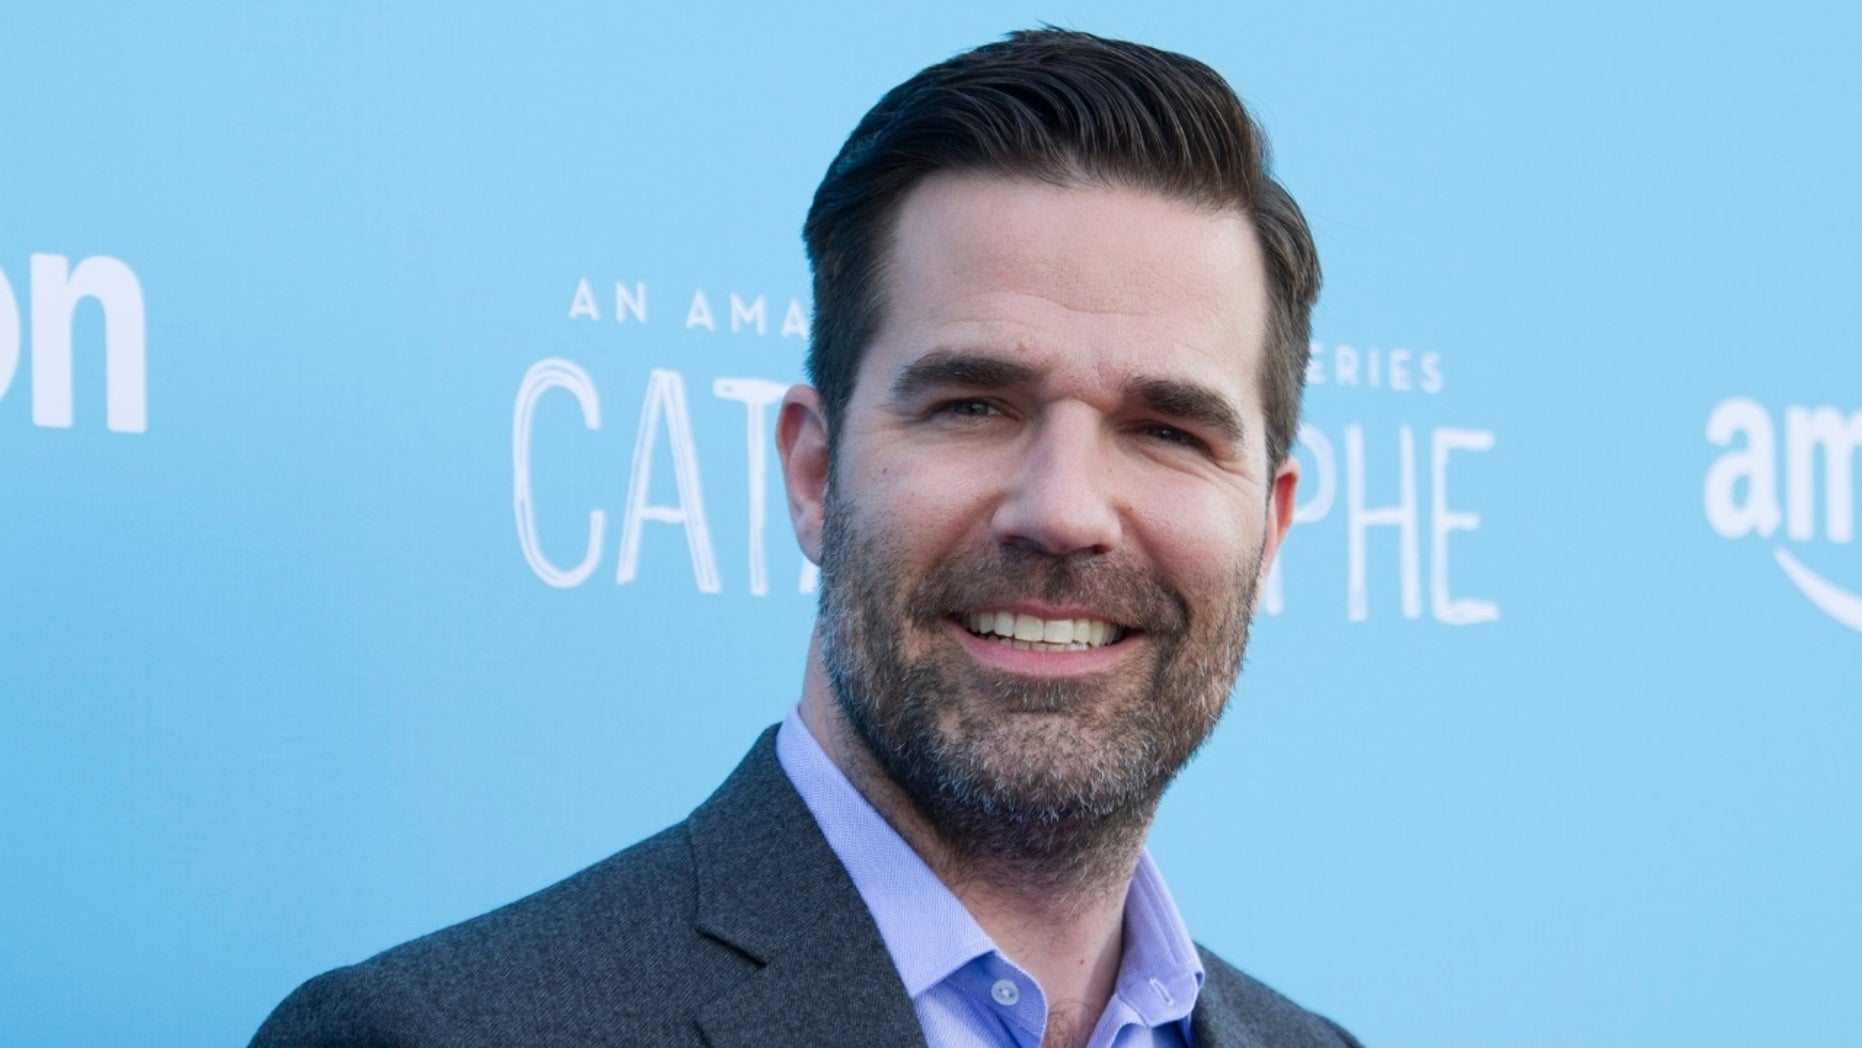 Rob Delaney and wife welcomed baby No. 4 months after son